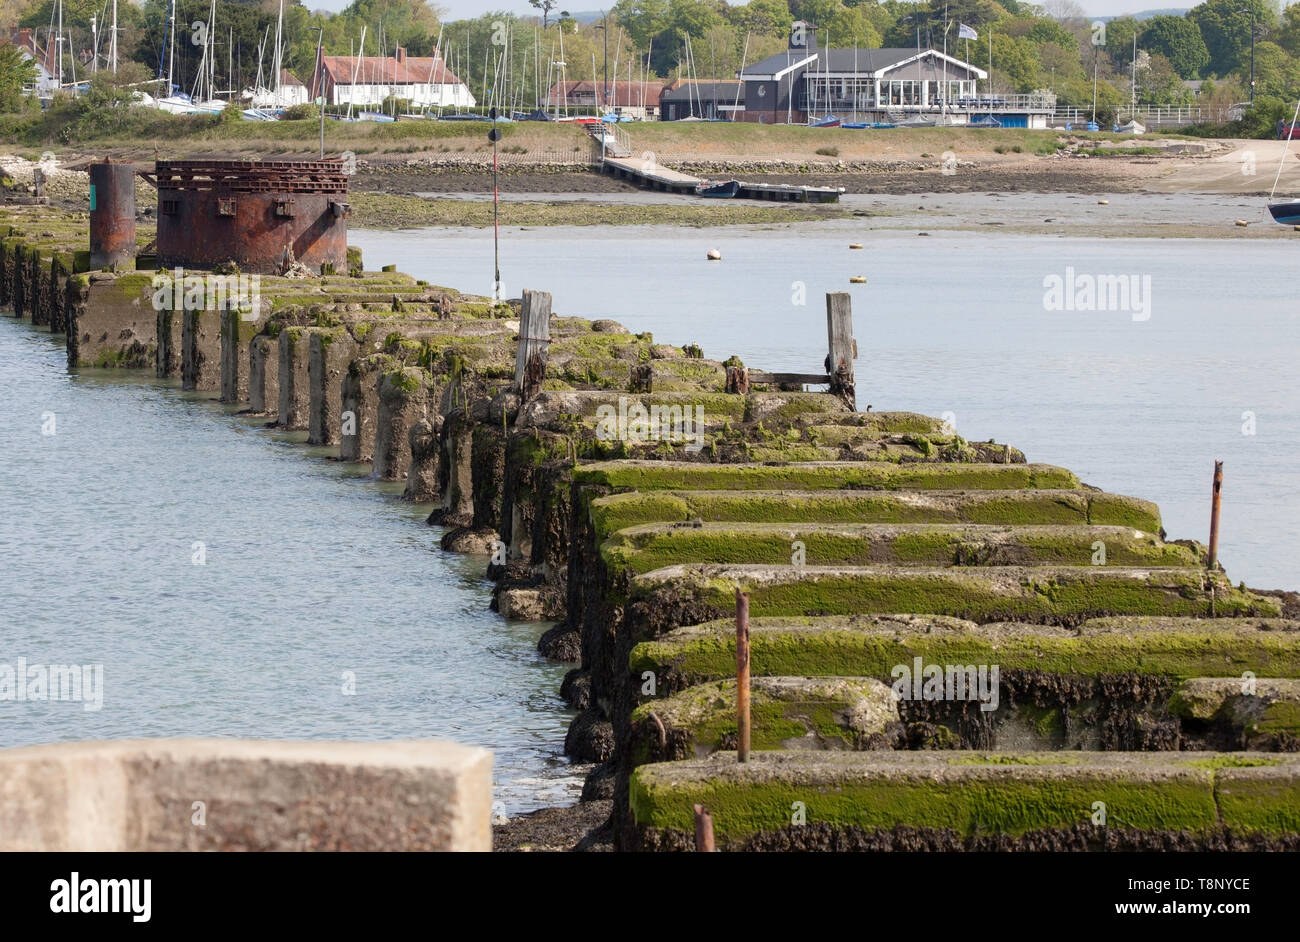 The remains of the old Hayling Island railway bridge at Langstone Harbour, part of Chichester Harbour Stock Photo